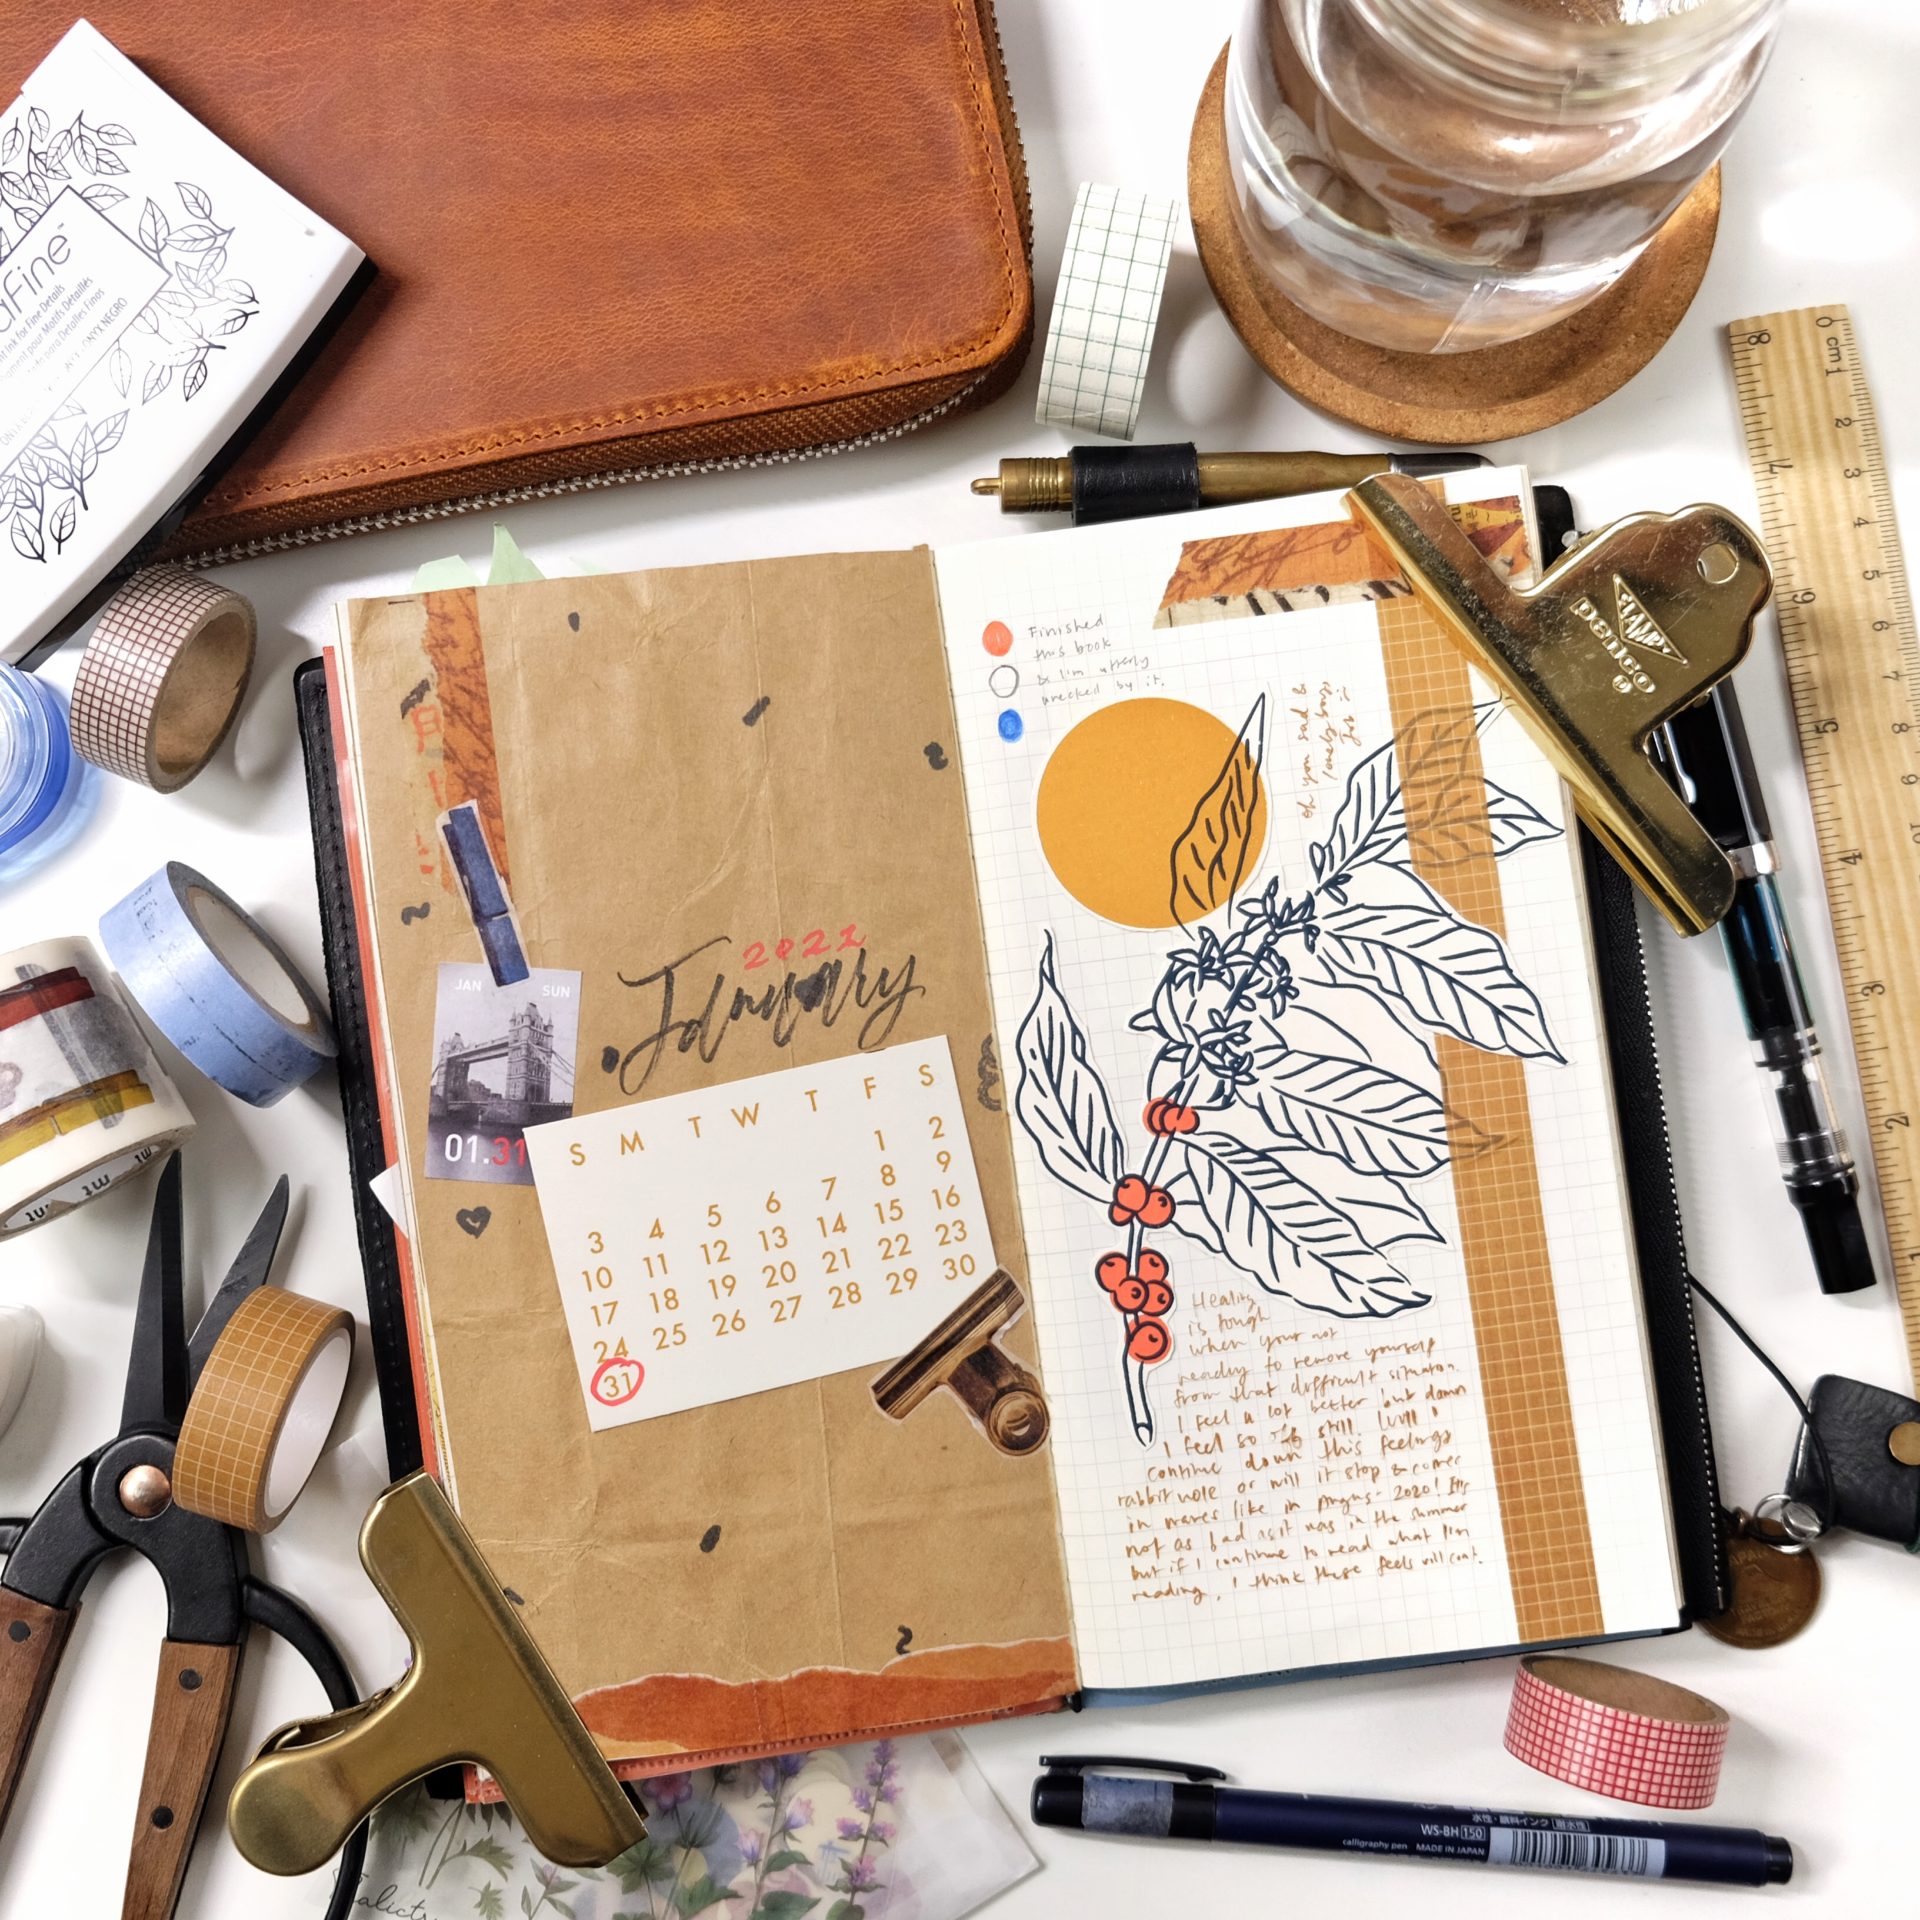 Introducing the Art Journal - Traveler's Notebook Collection